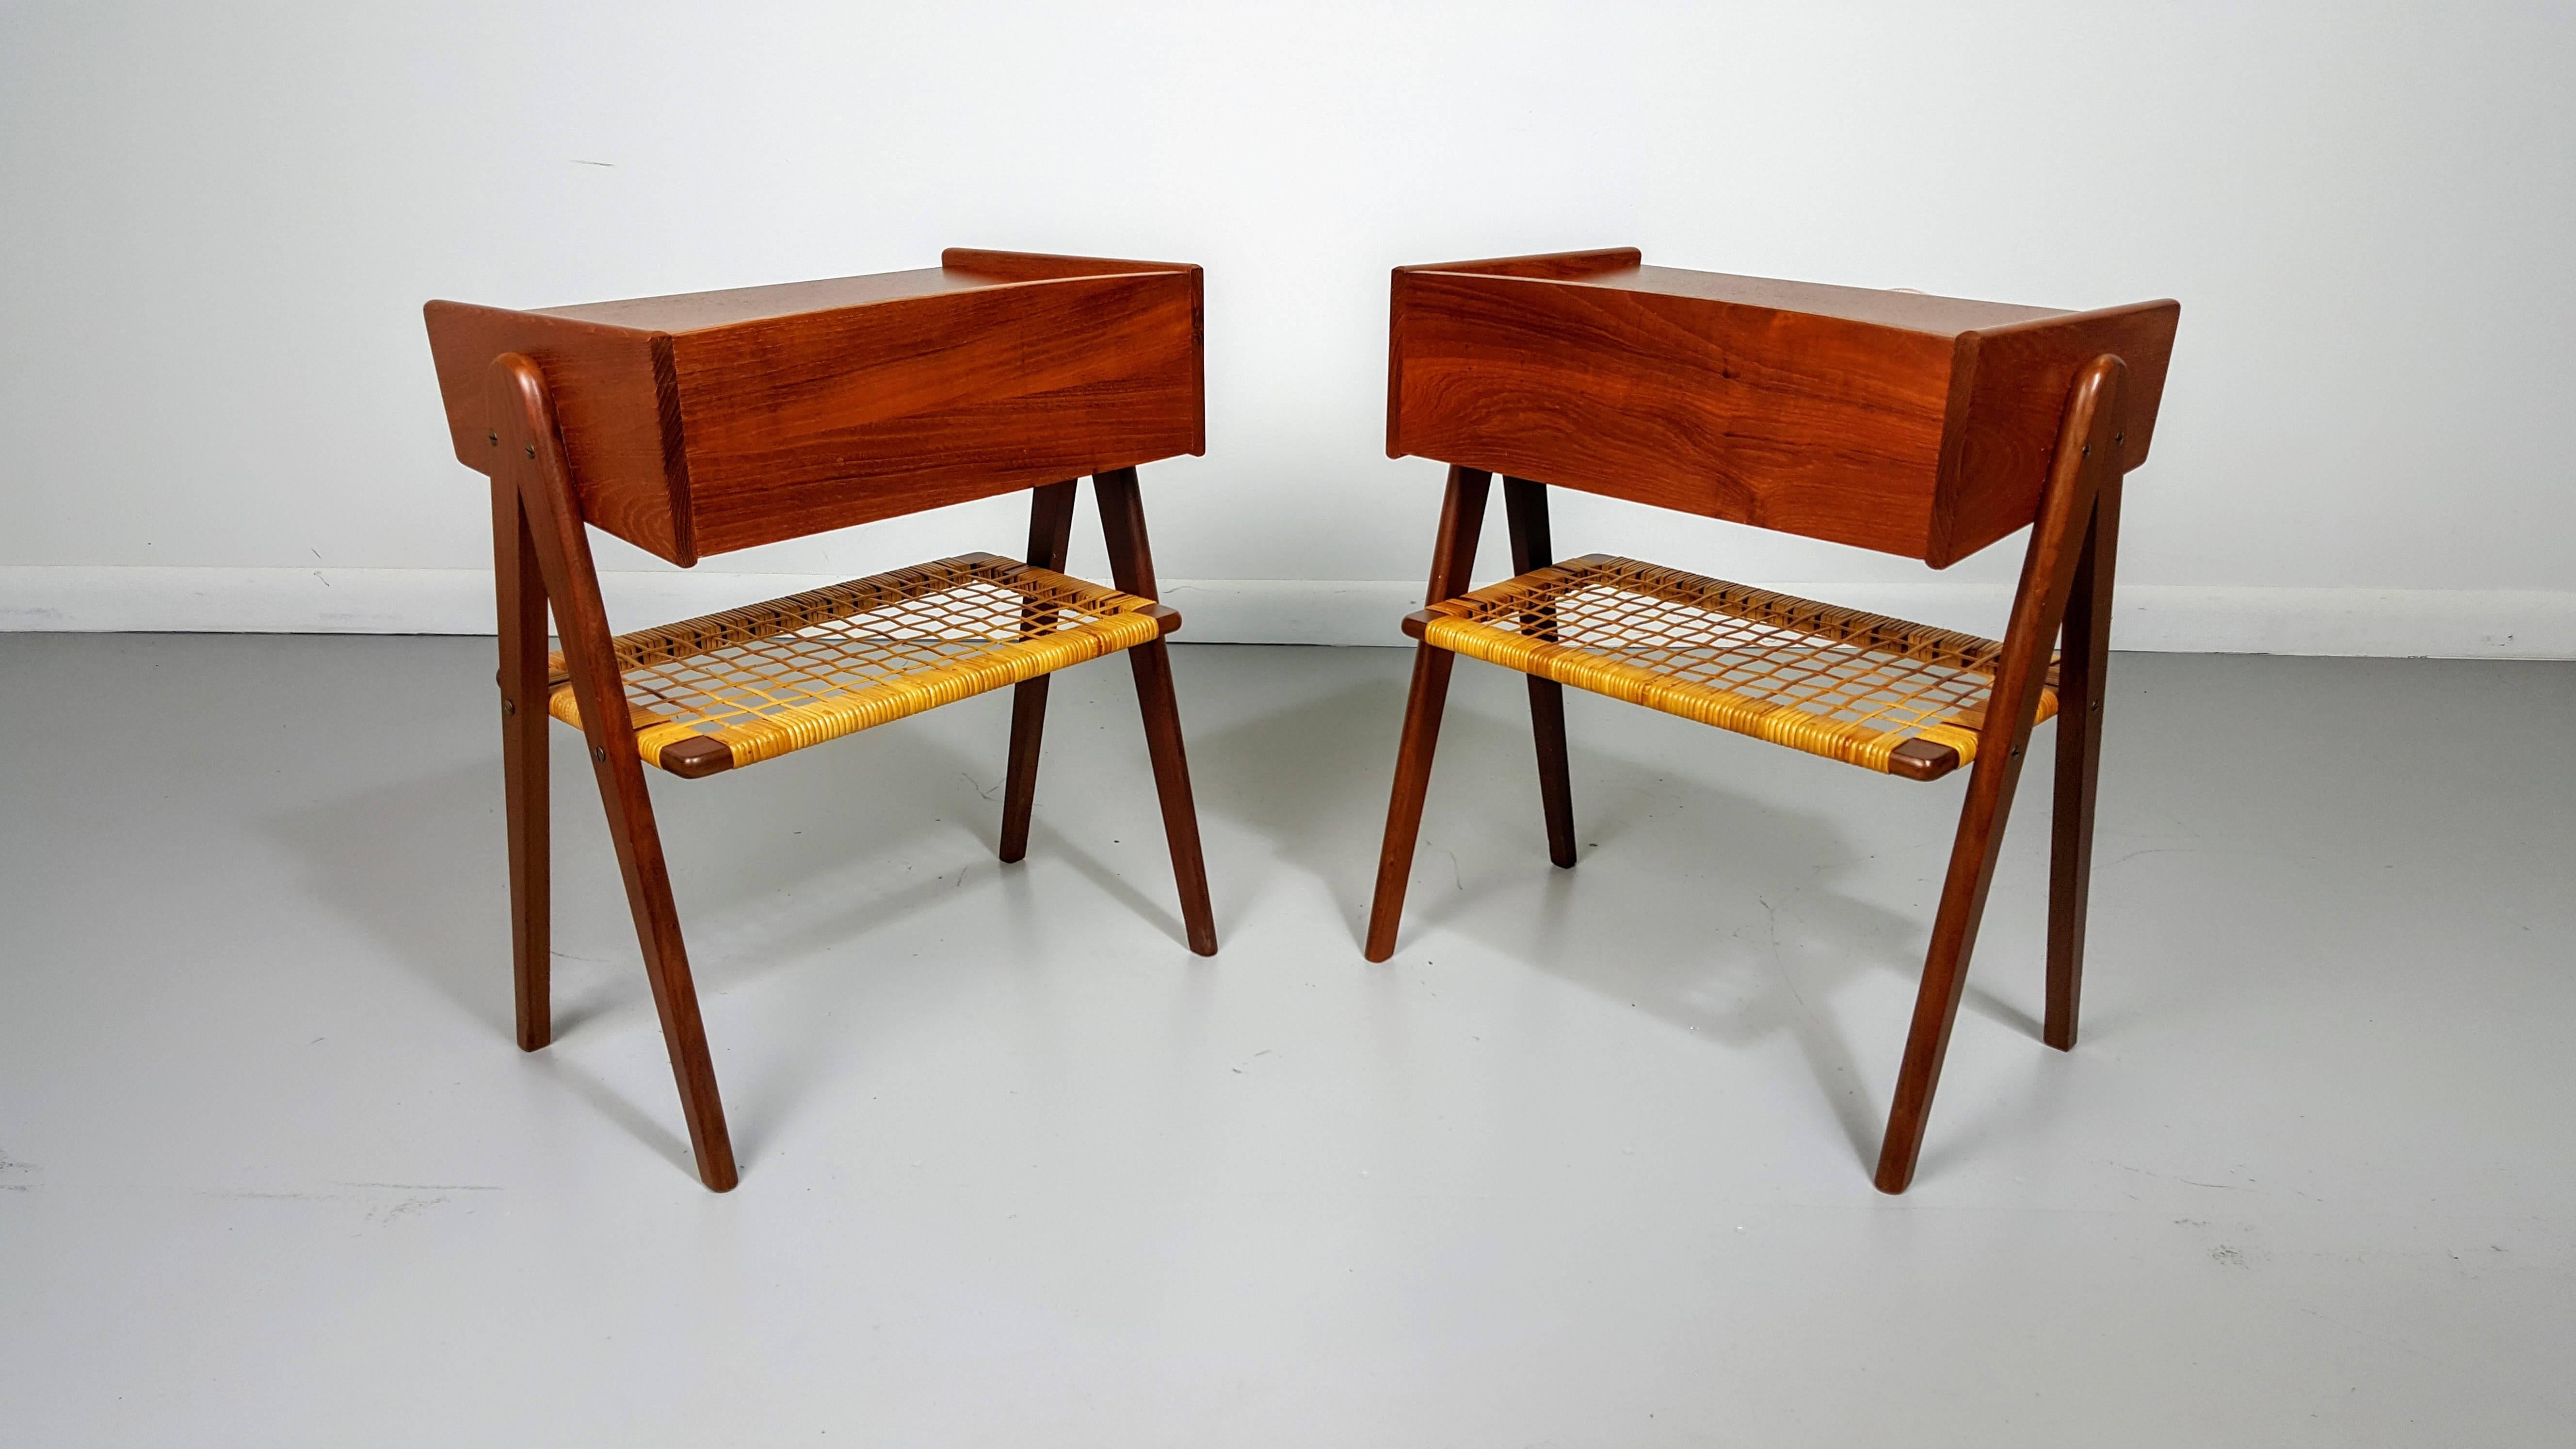 Brilliant Danish Modern Teak Nightstands in the style of Kurt Ostervig, 1950s.

We offer free regular deliveries to NYC and Philadelphia area. Delivery to DC, MD, CT and MA are available if schedule permits, please message for a location-based